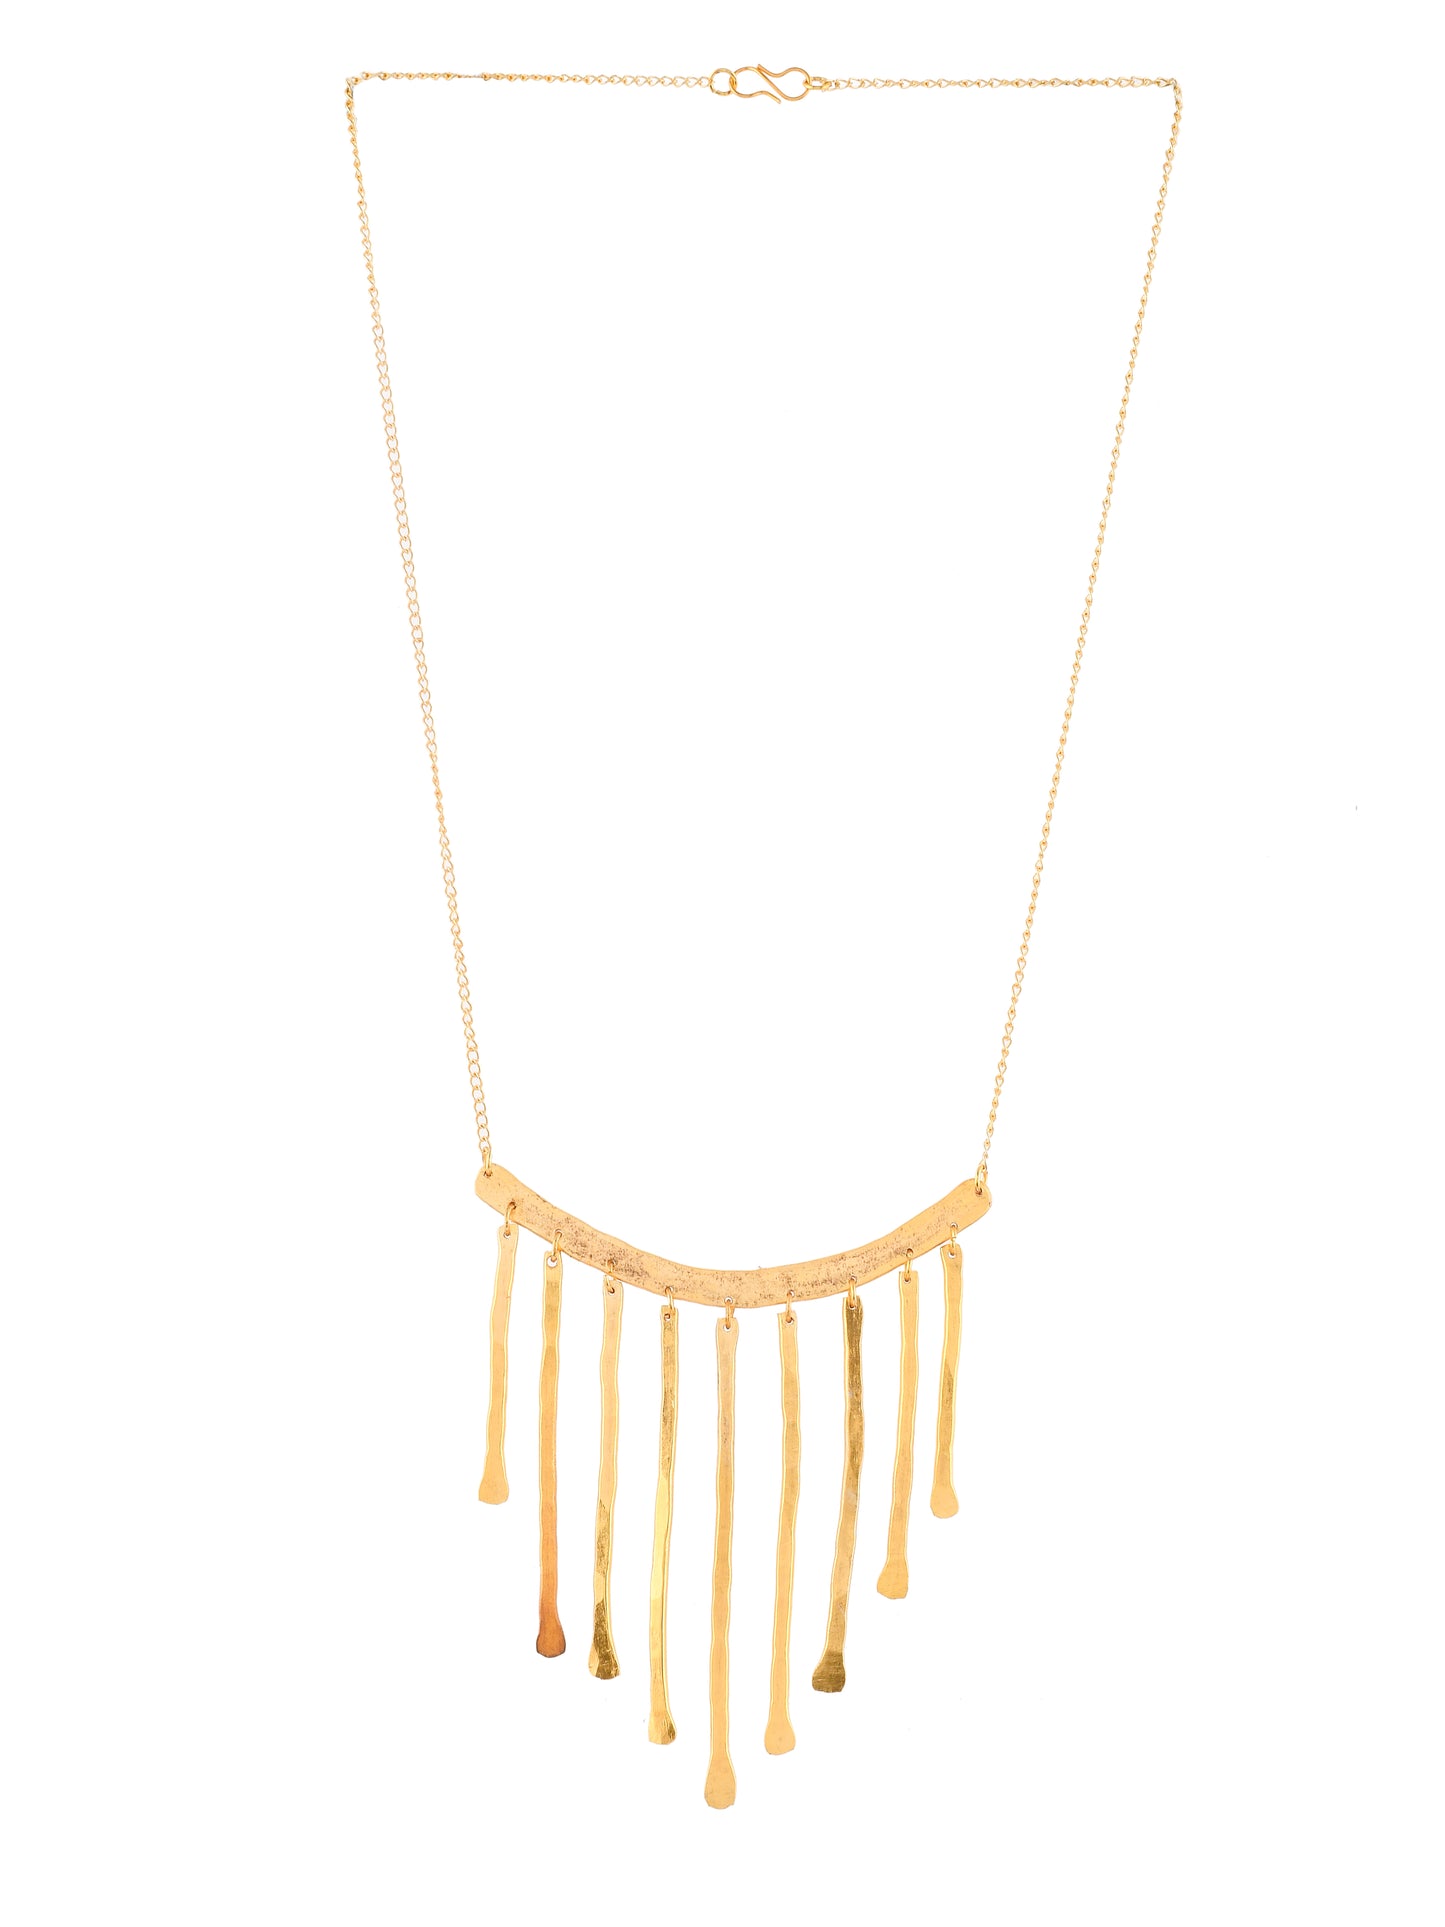 Gold Plated Handcrafted Statement Necklace